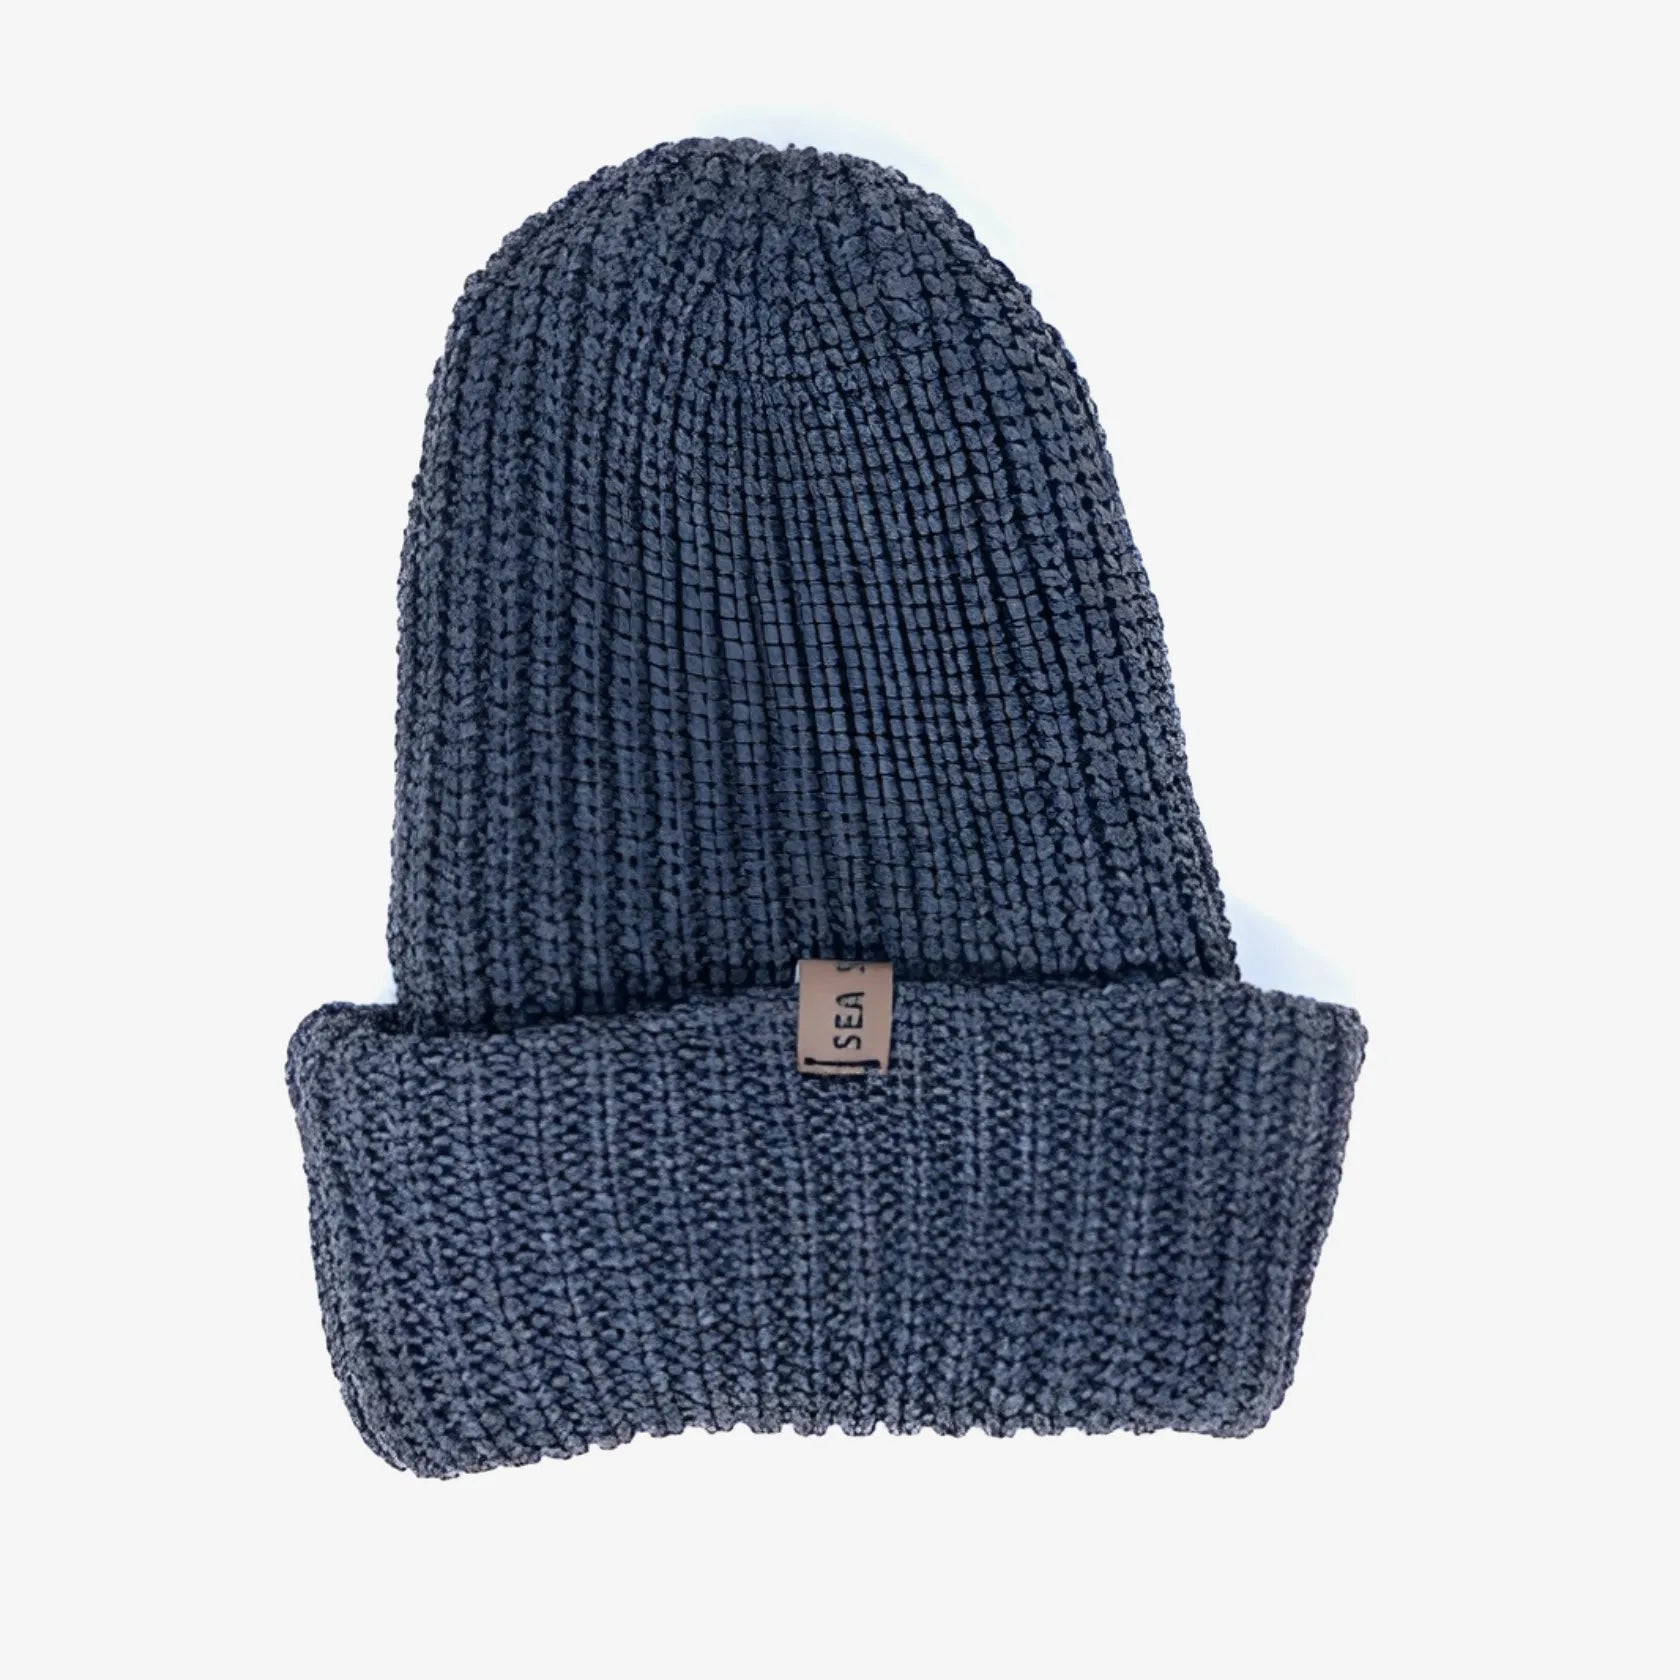 Knit Beanie - Sea Señor Outfitters